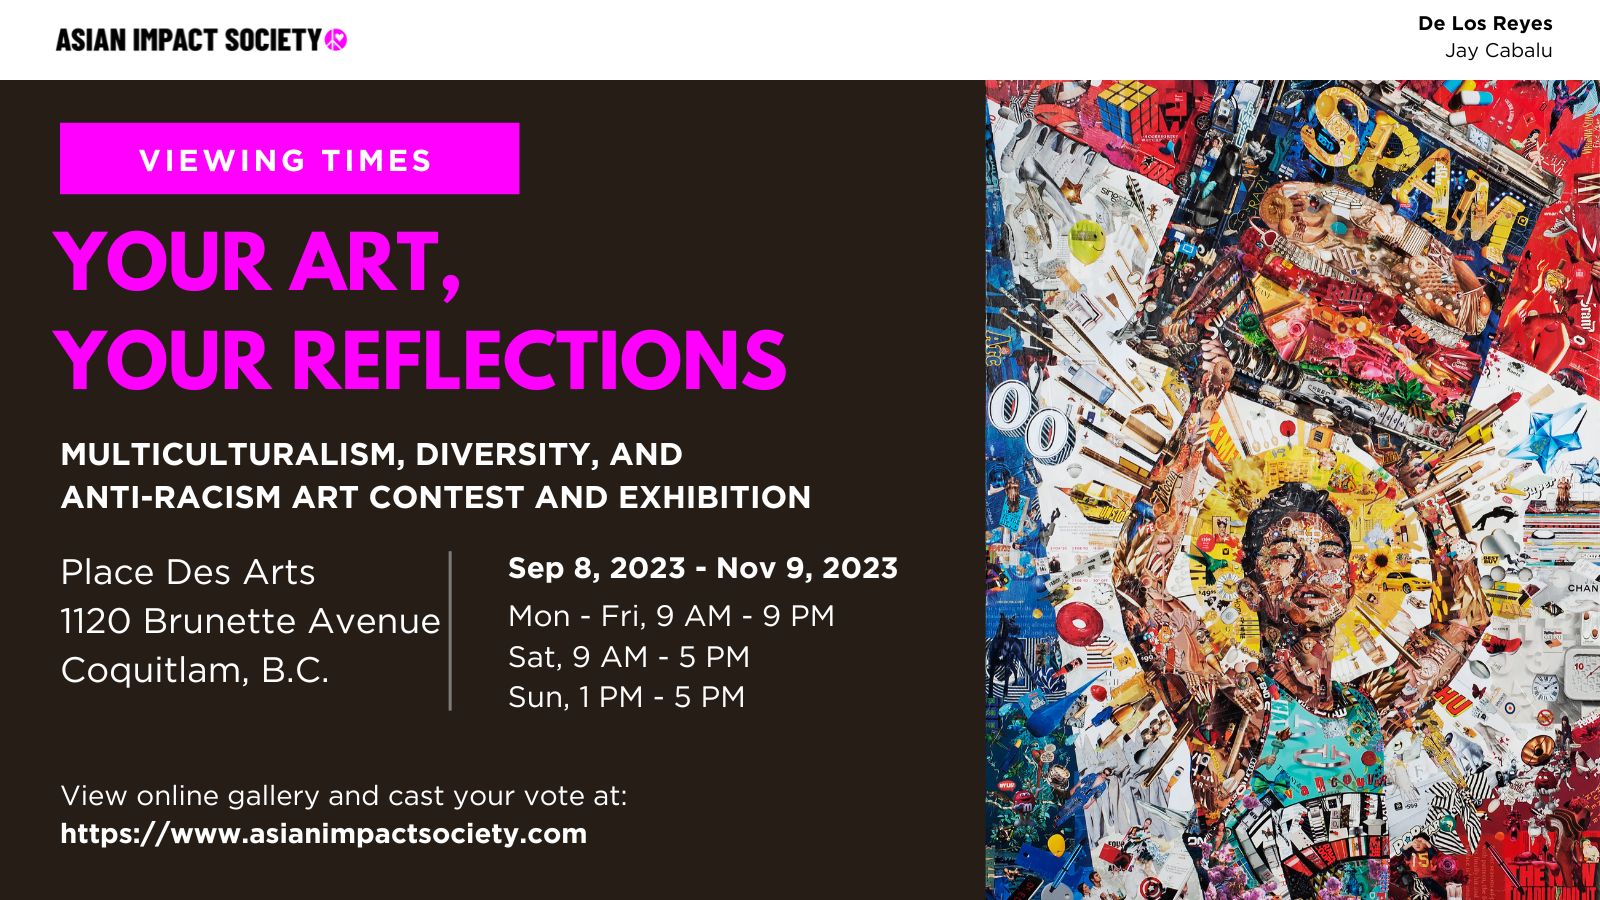 Your Art Your Reflections Multiculturalism, Diversity and Anti-Racism Art Exhibit, Coquitlam, British Columbia, Canada